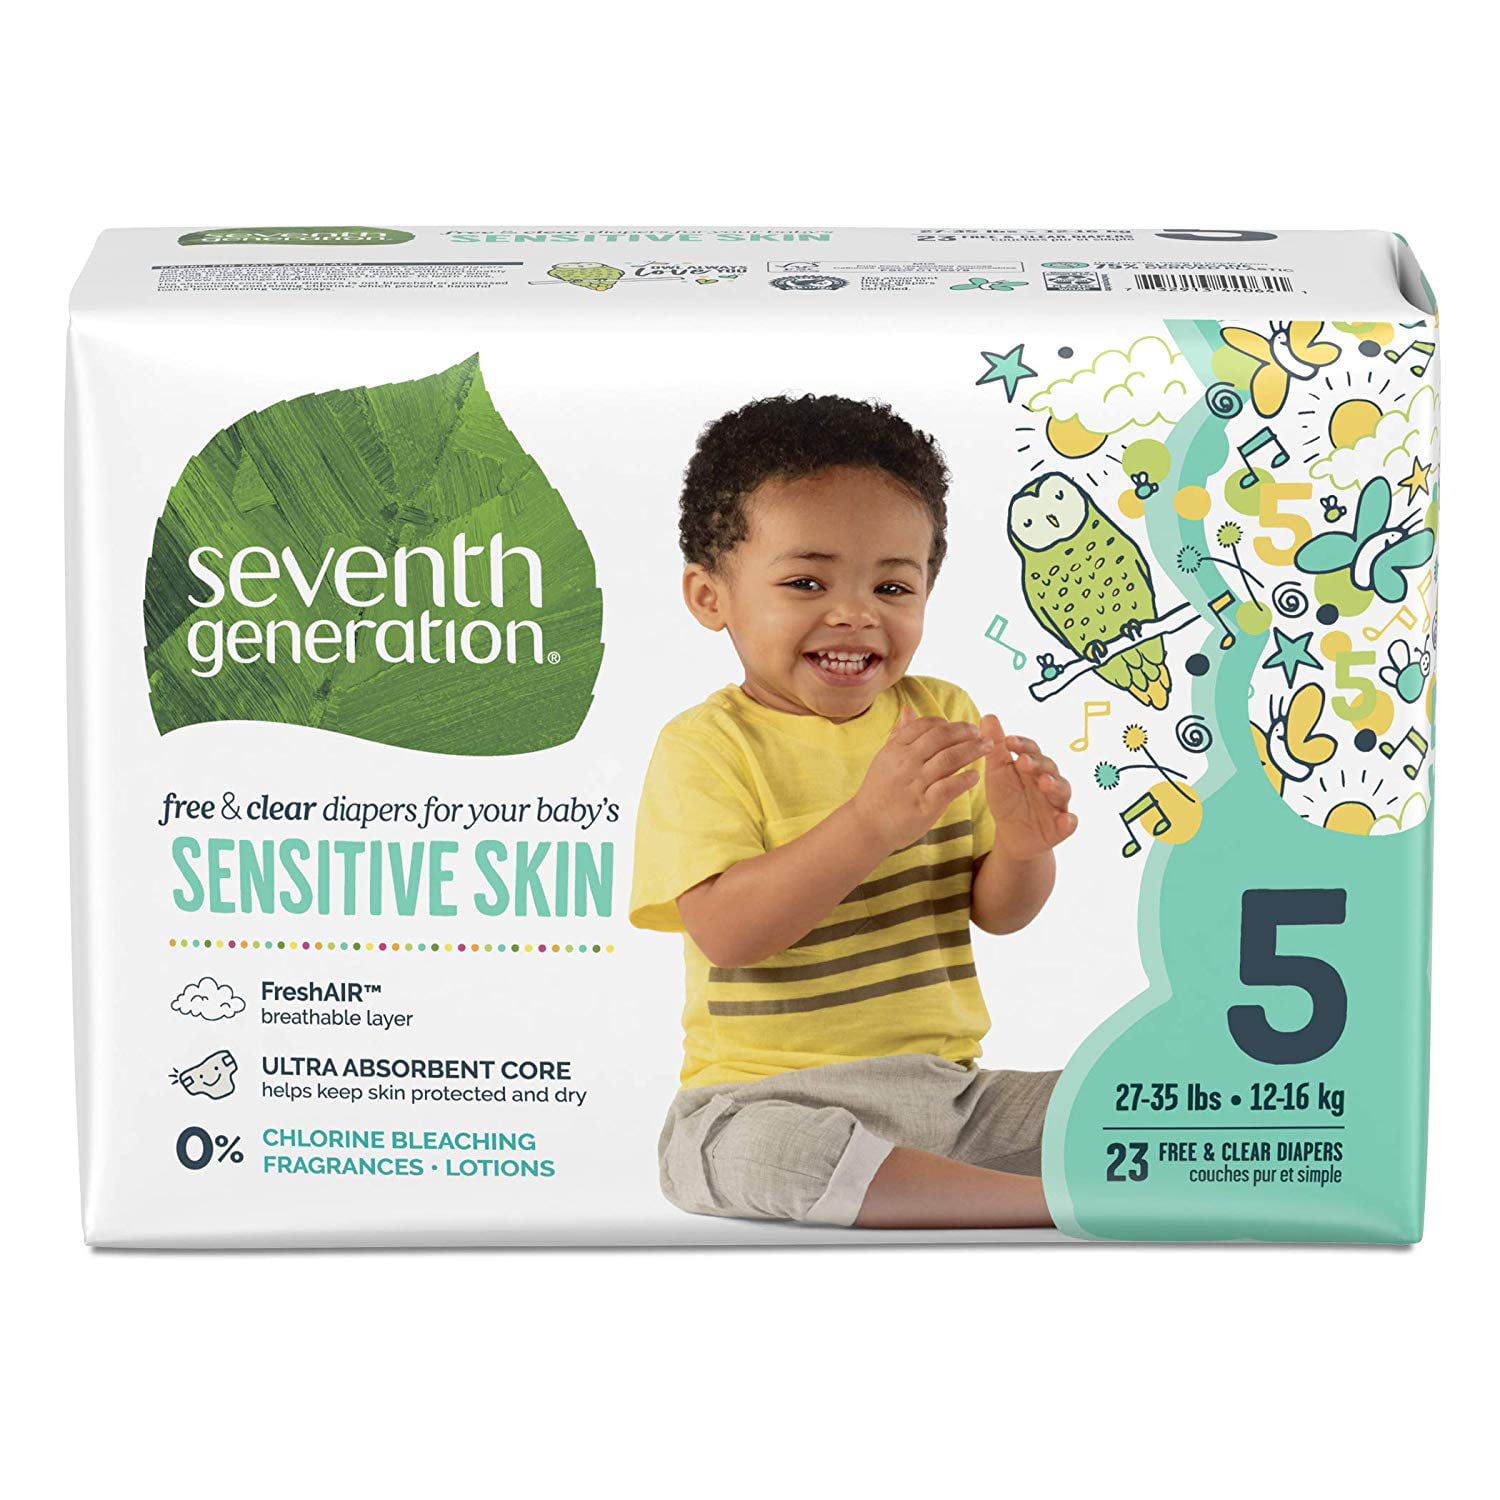 Seventh Generation Free and Clear Sensitive Skin Baby Diapers with Animal Prints 